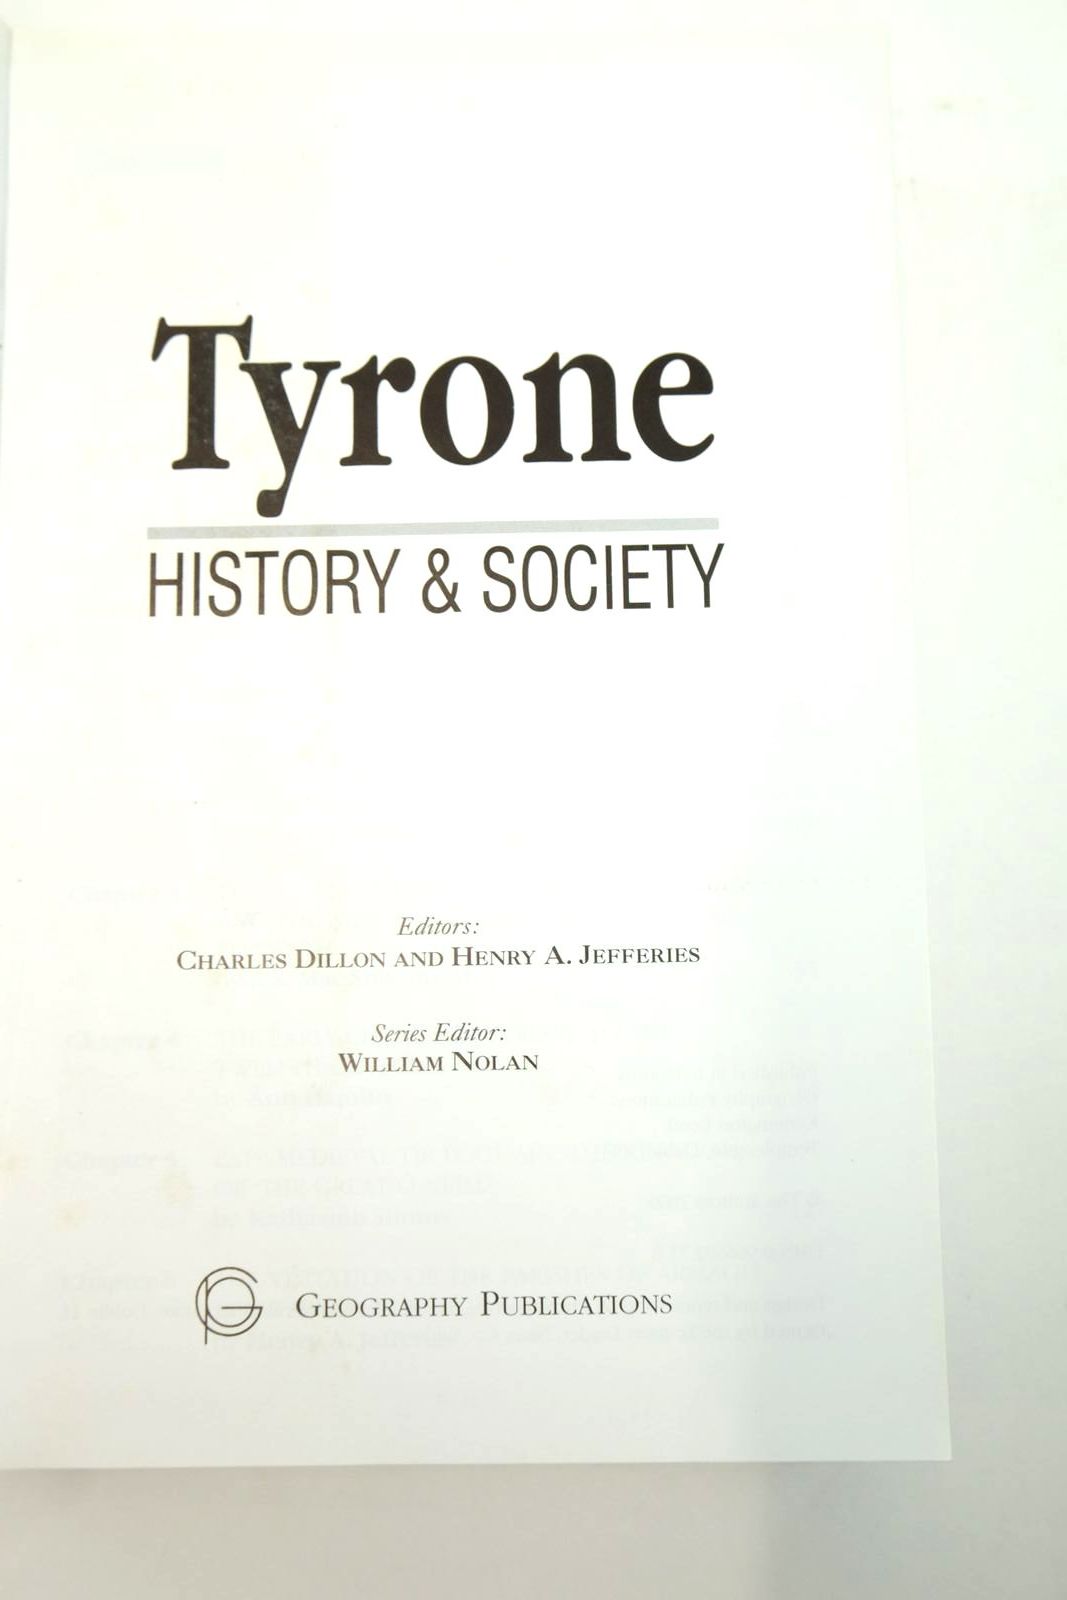 Photo of TYRONE: HISTORY & SOCIETY written by Dillon, Charles
Nolan, William
Jefferies, Henry A.
et al, published by Geography Publications (STOCK CODE: 2140608)  for sale by Stella & Rose's Books